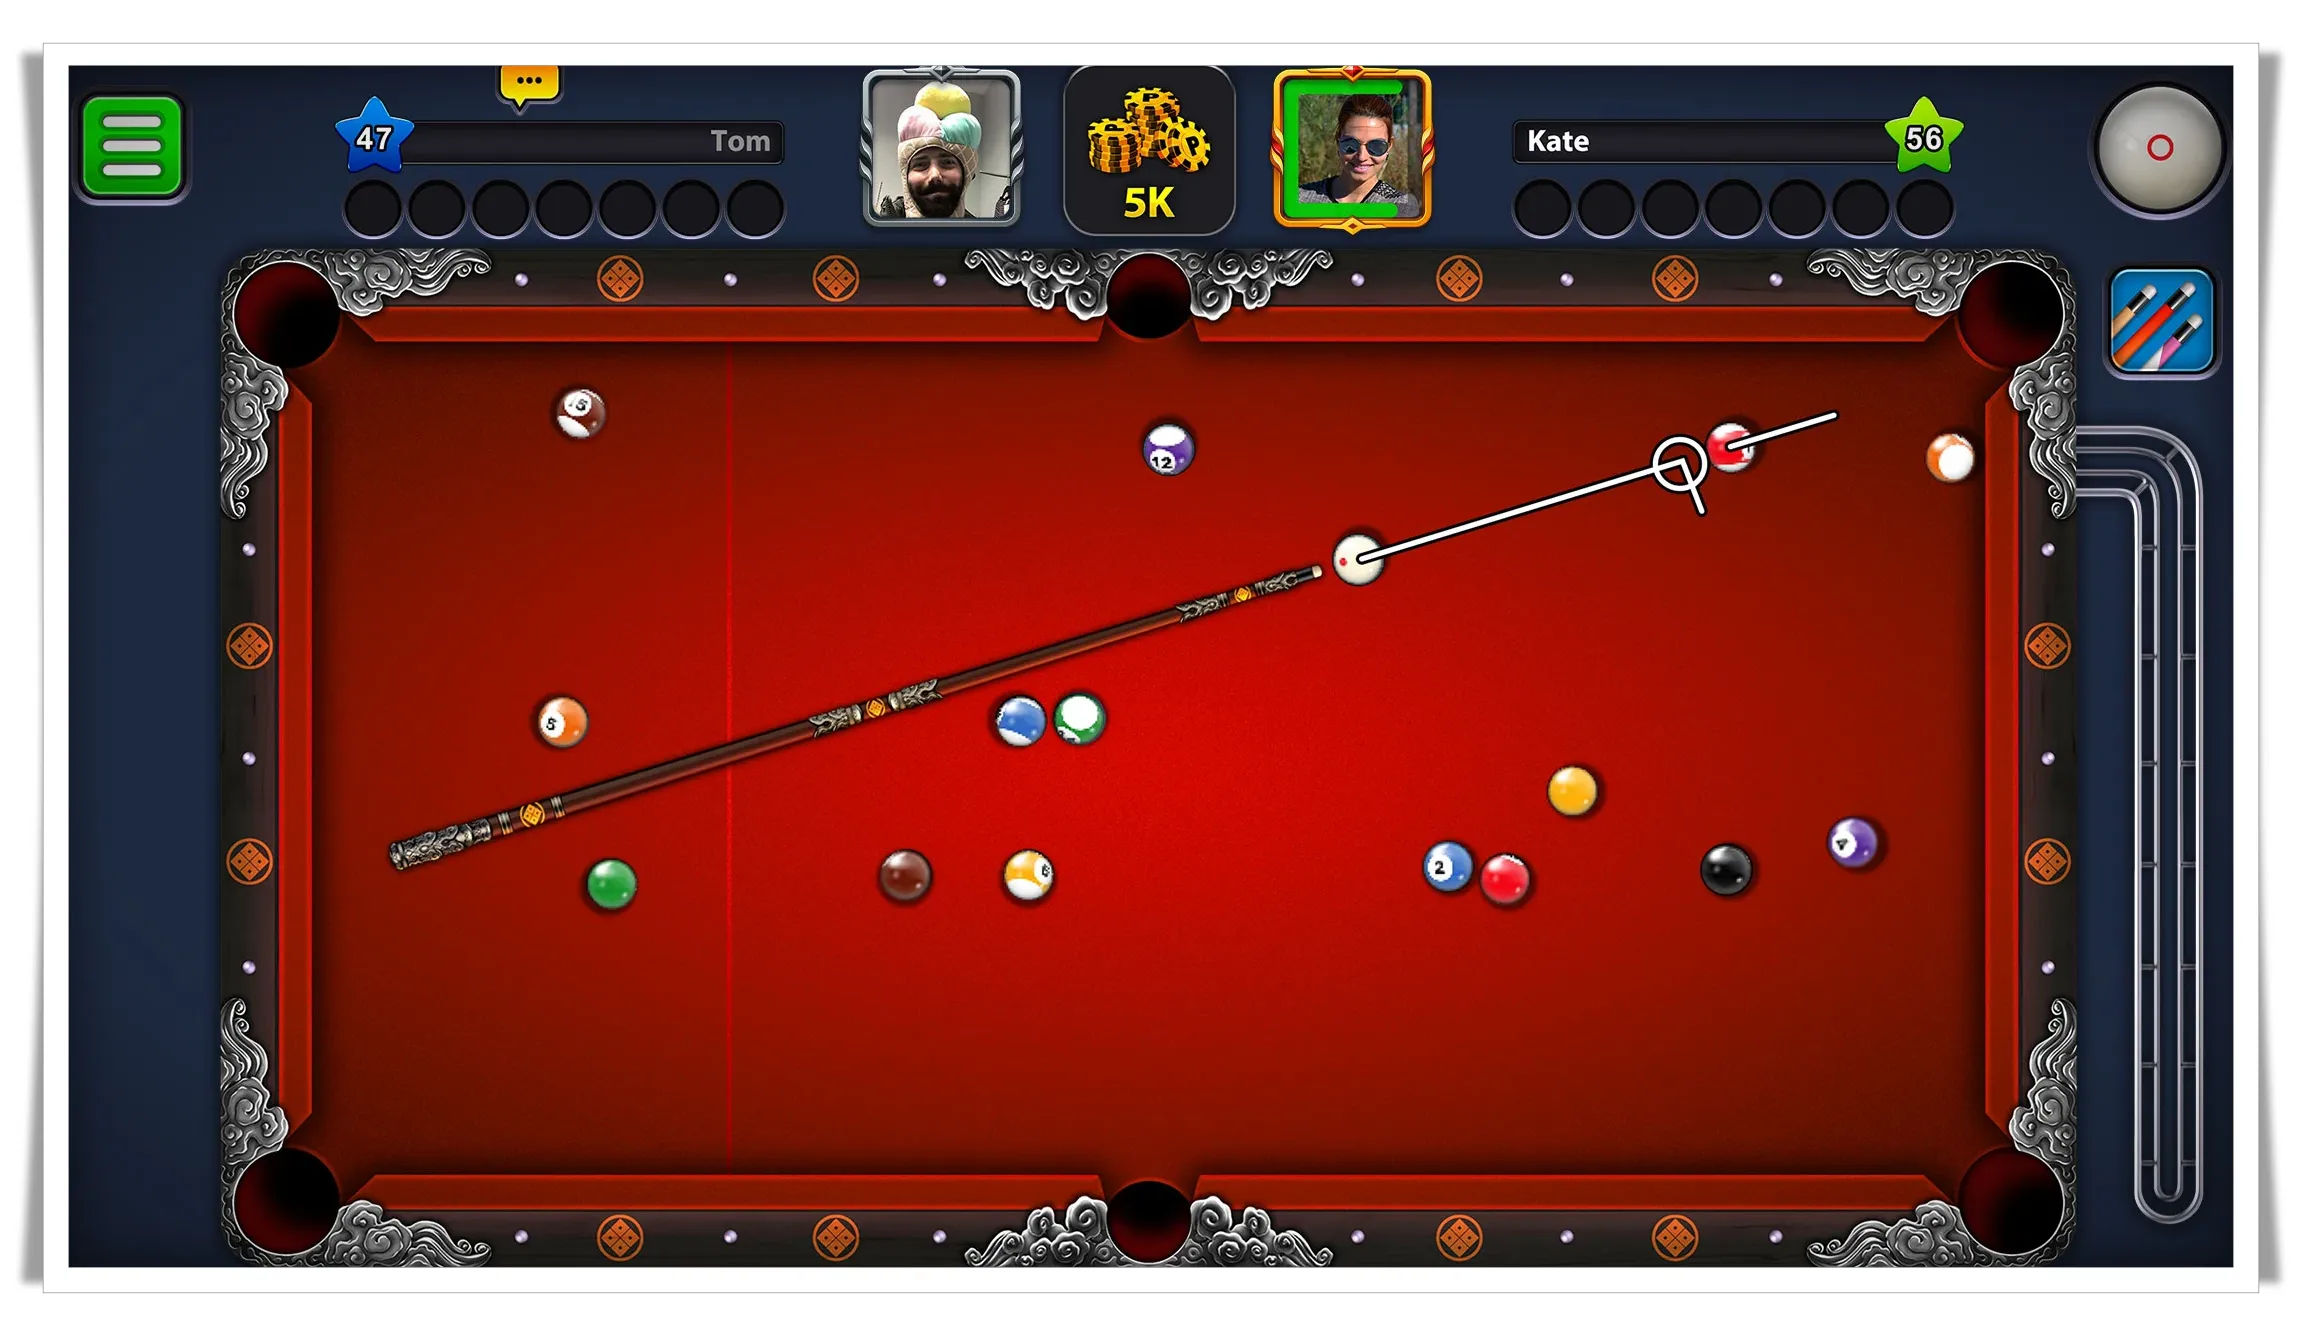 8 Ball Pool Mod APK 5.14.5. Embark on an exhilarating journey with…, by  APKHIHE, Nov, 2023